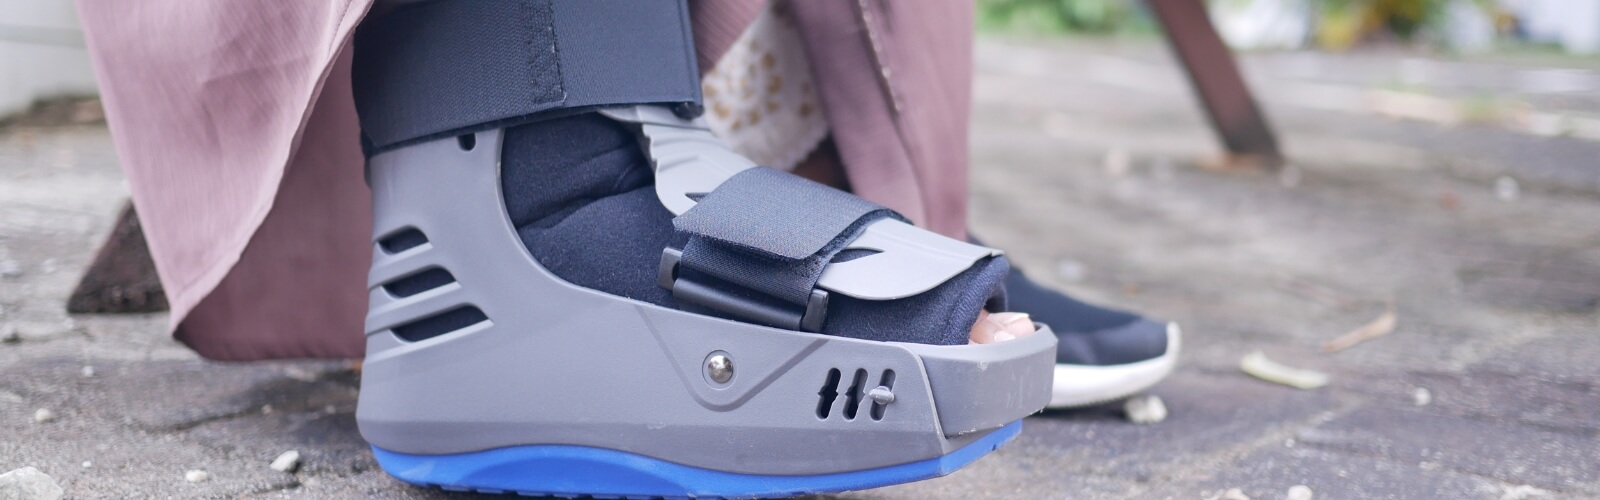 CAM boots and their uses in rehabilitation of foot and ankle injuries